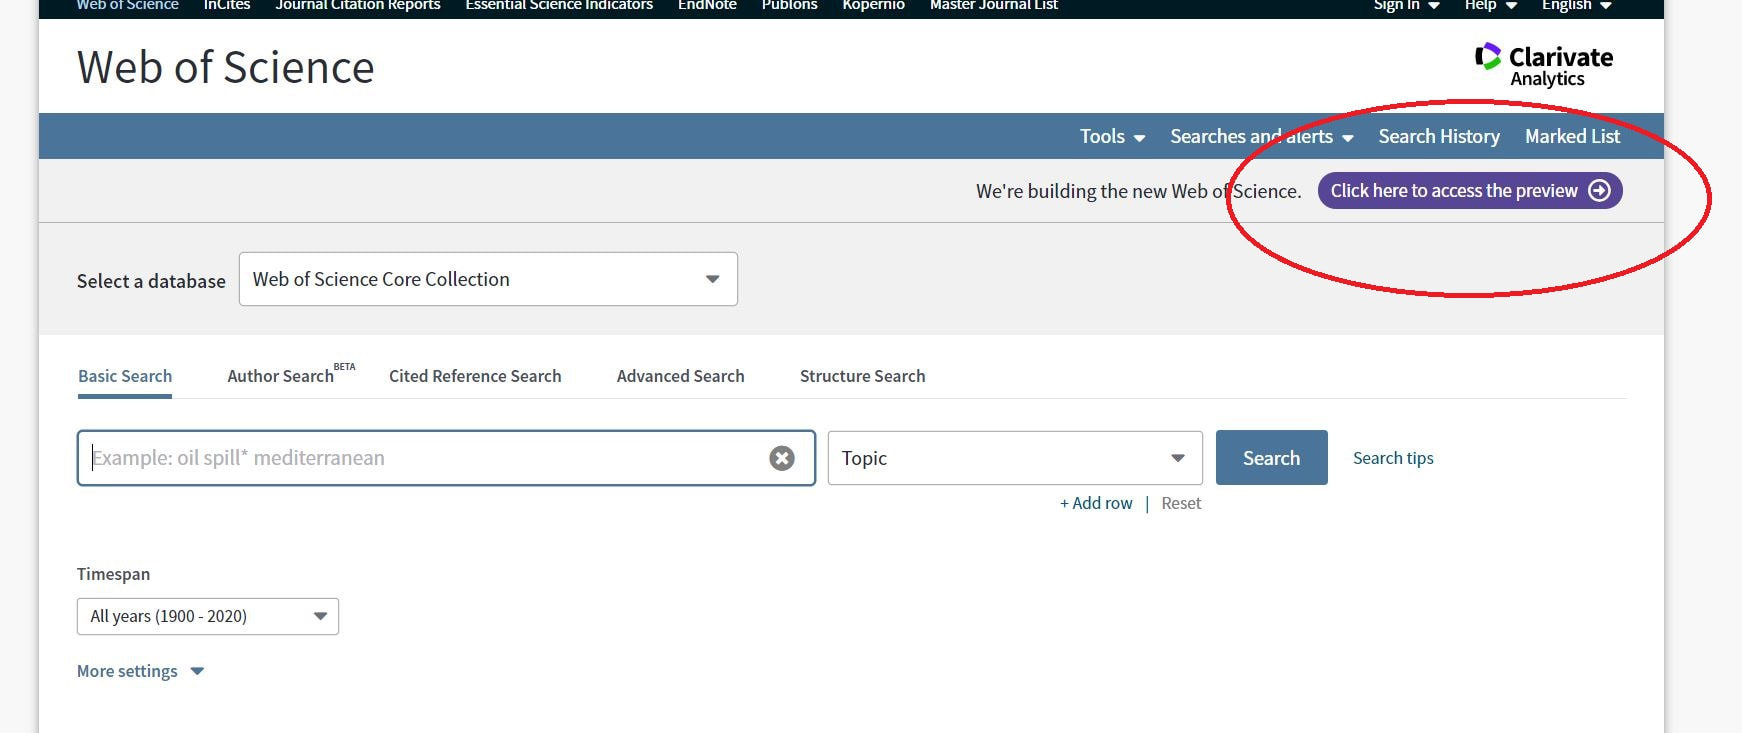 Screenshot of new Web of Science interface. In top right corner, there is a button that says 